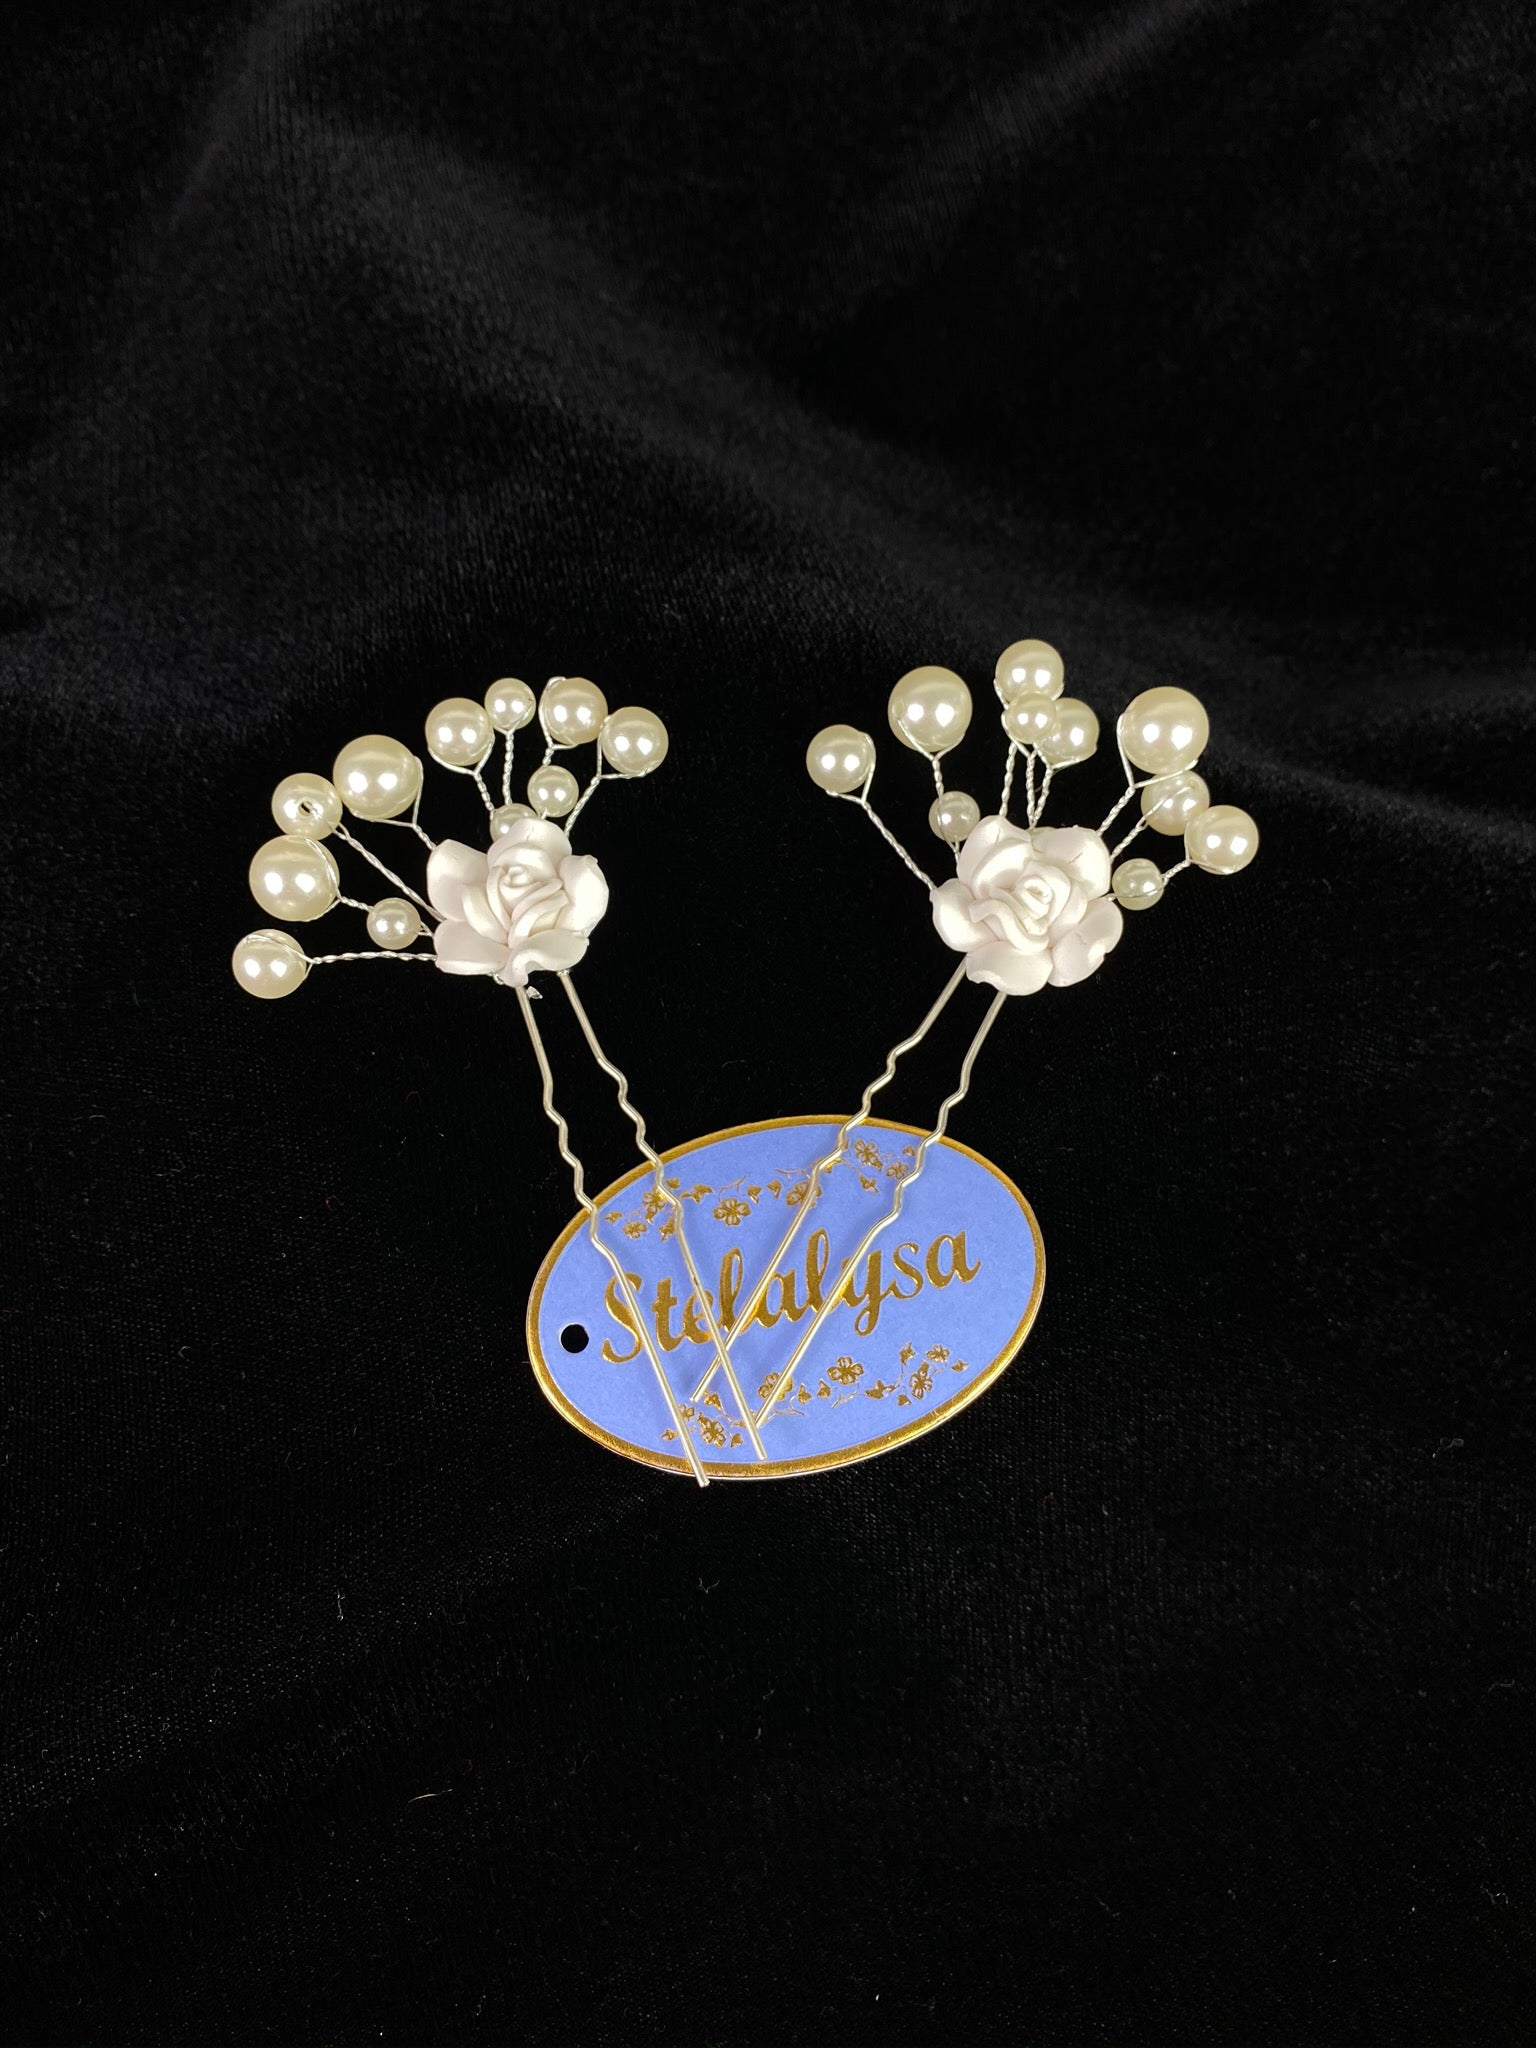 Decorative hair pin with pearls and single rose.  Comes as a set of 2.